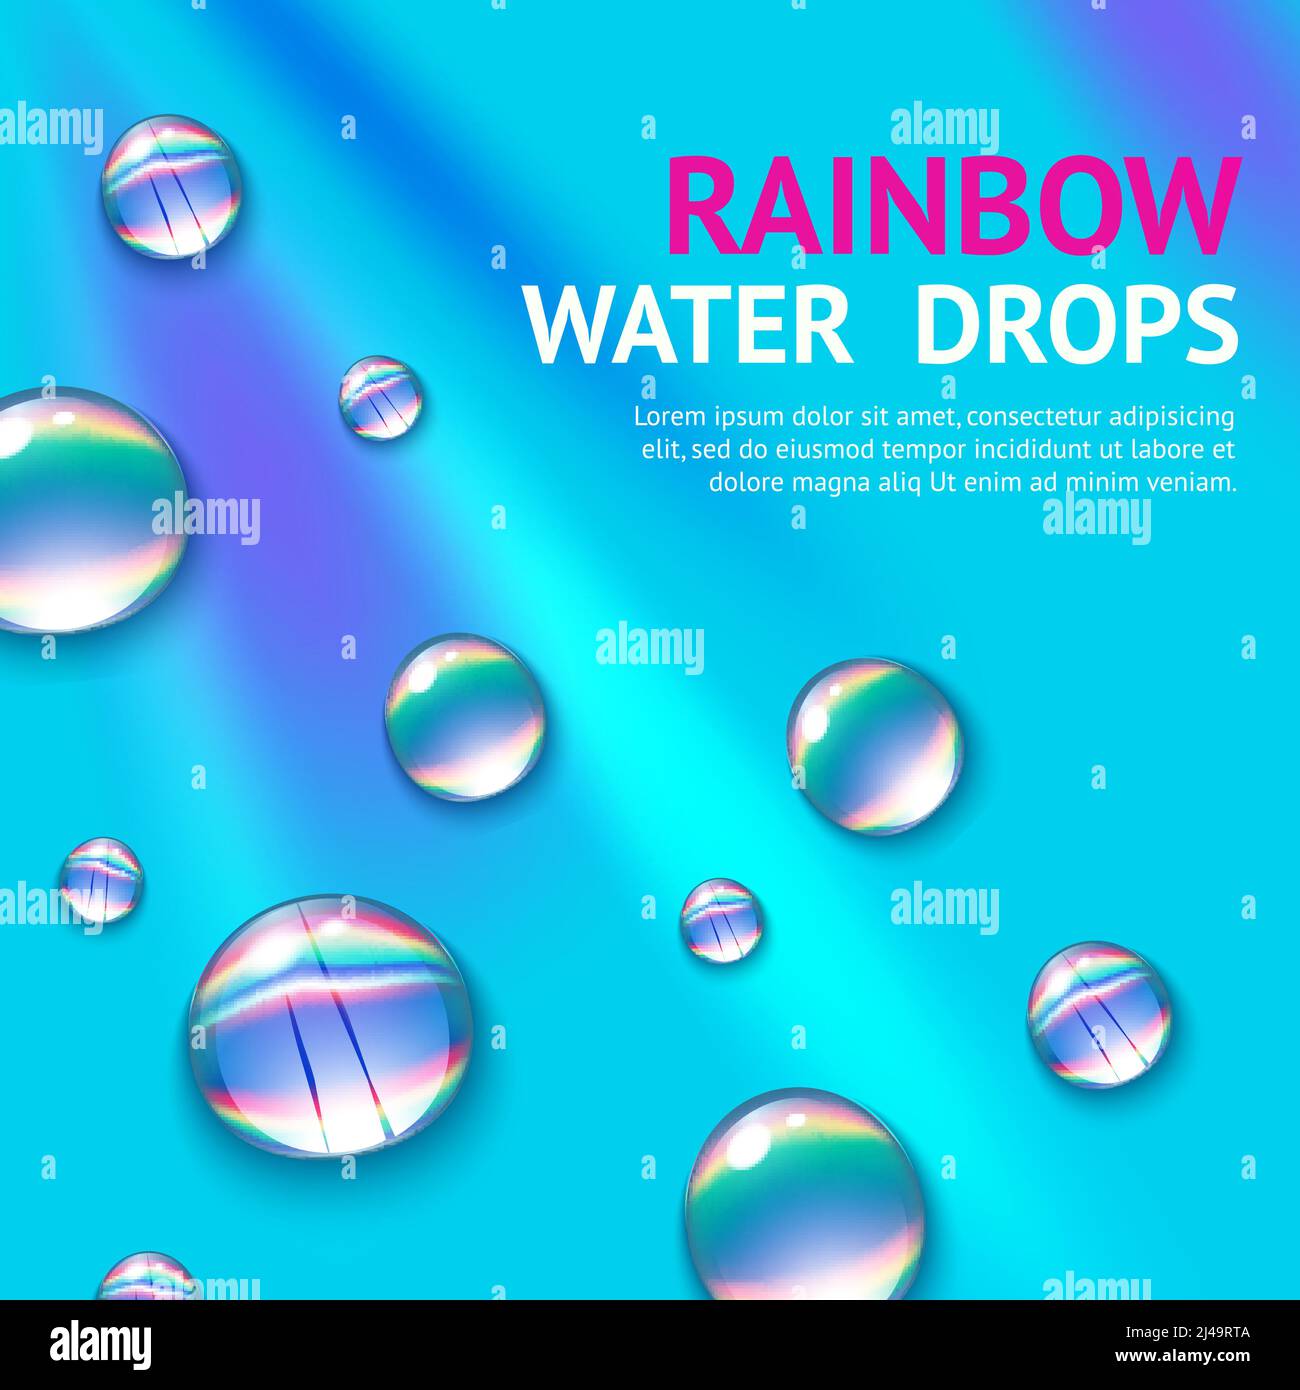 Realistic water drops with colorful rainbow reflection inside poster vector illustration Stock Vector